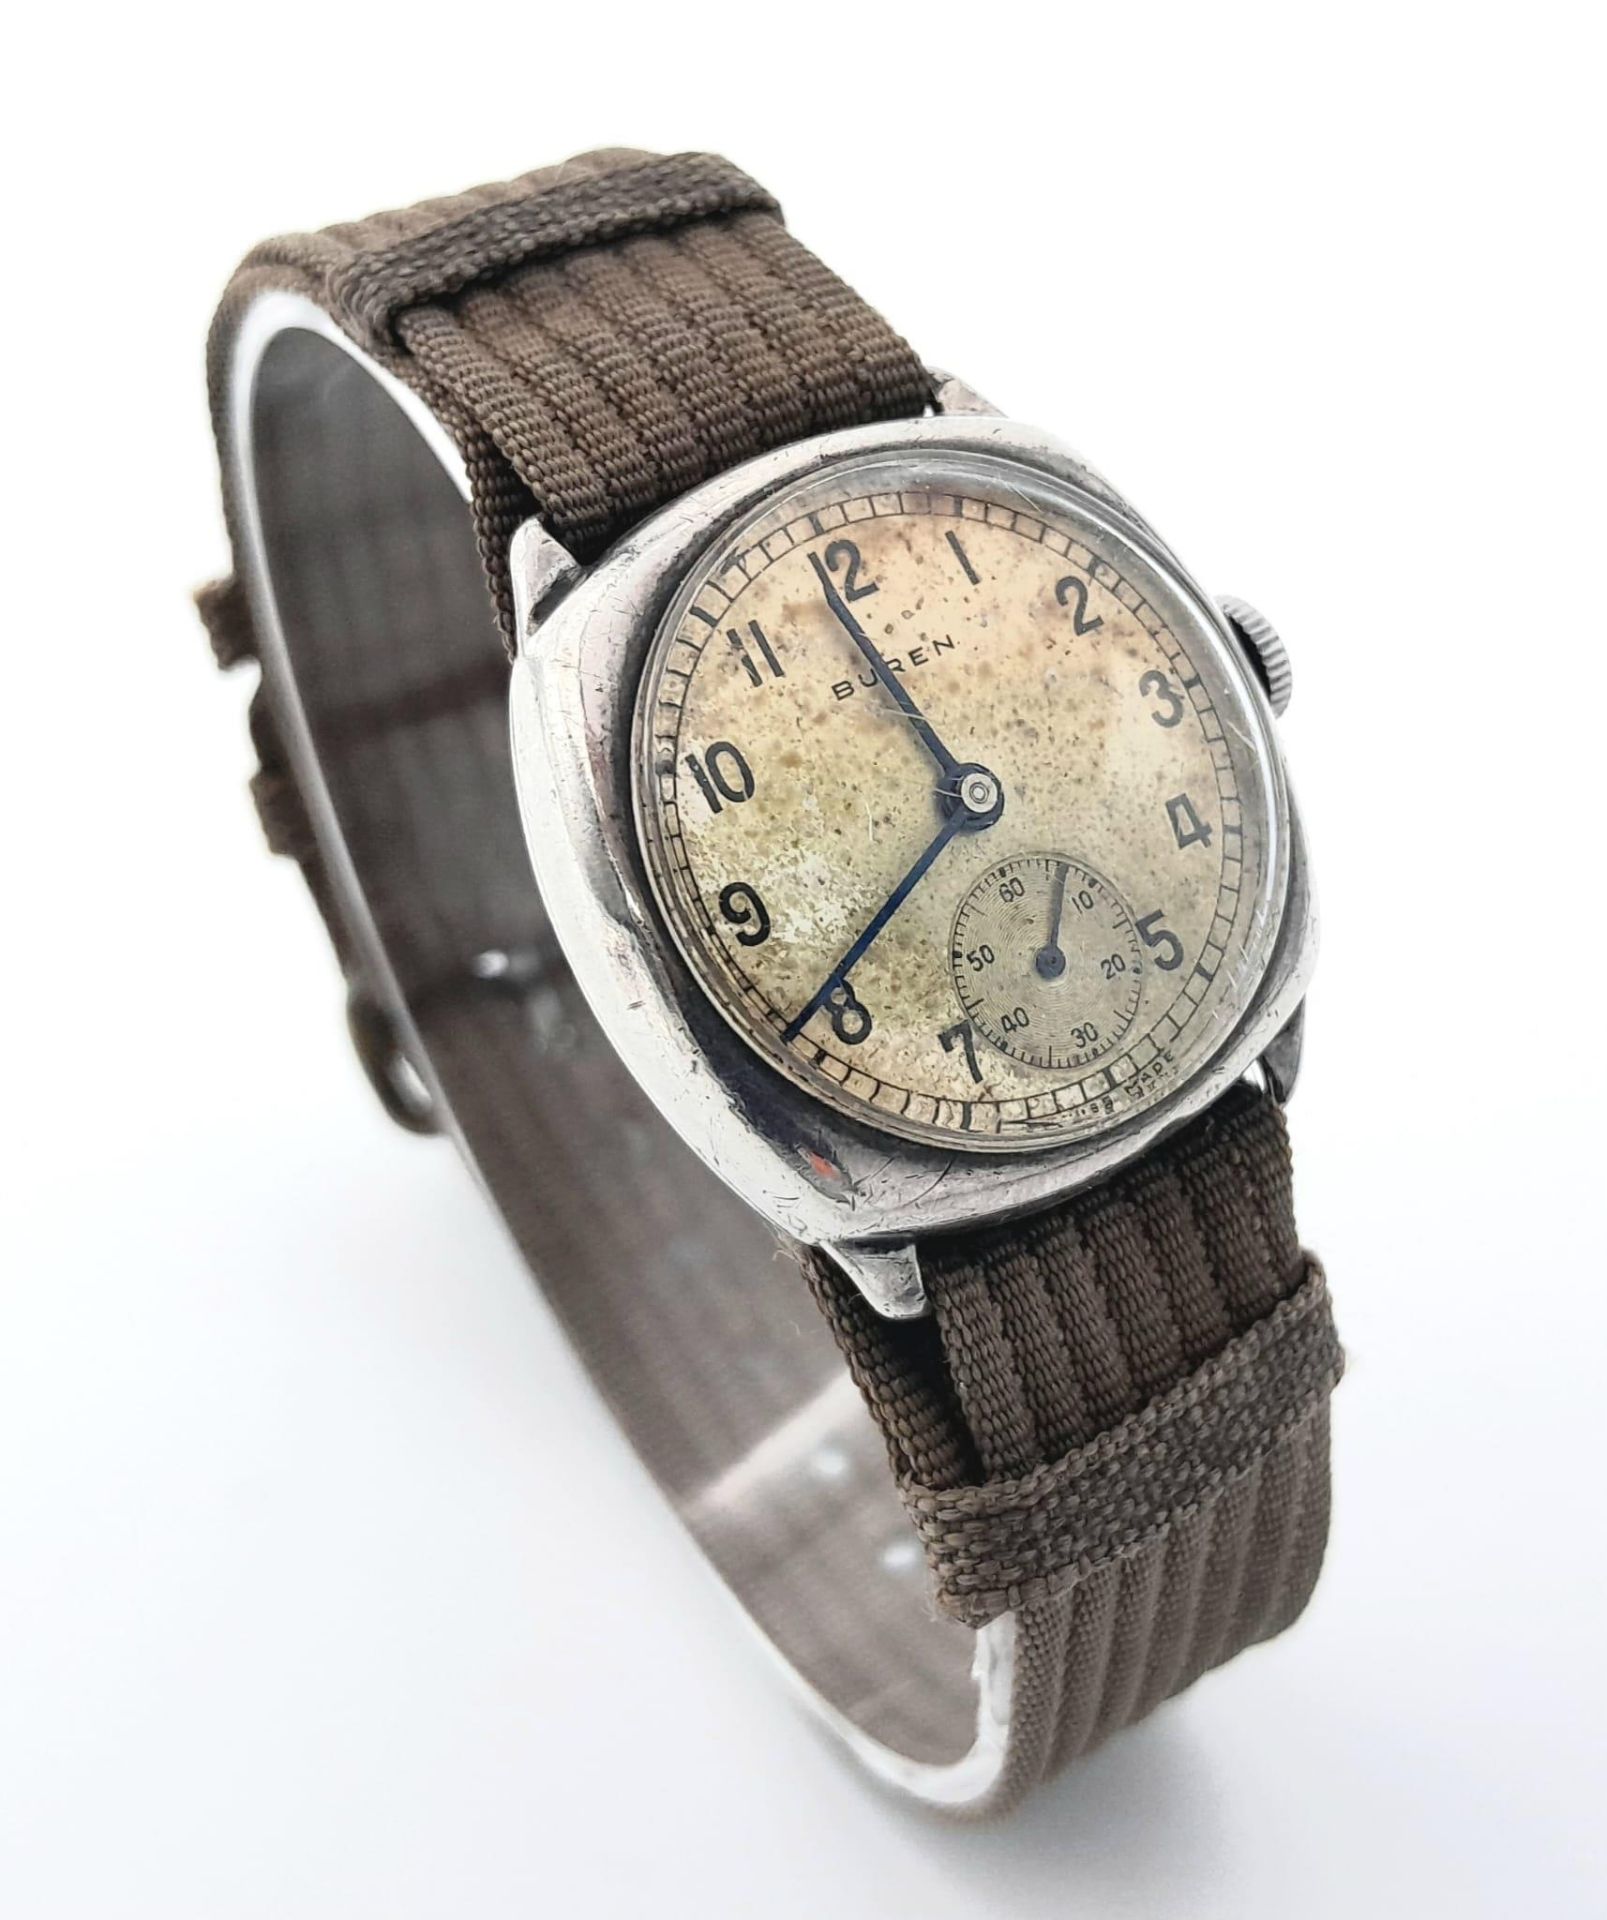 A Vintage Buren (1940s) Mechanical Gents Watch. Textile strap. Stainless steel case - 30mm. Patinaed - Image 3 of 5